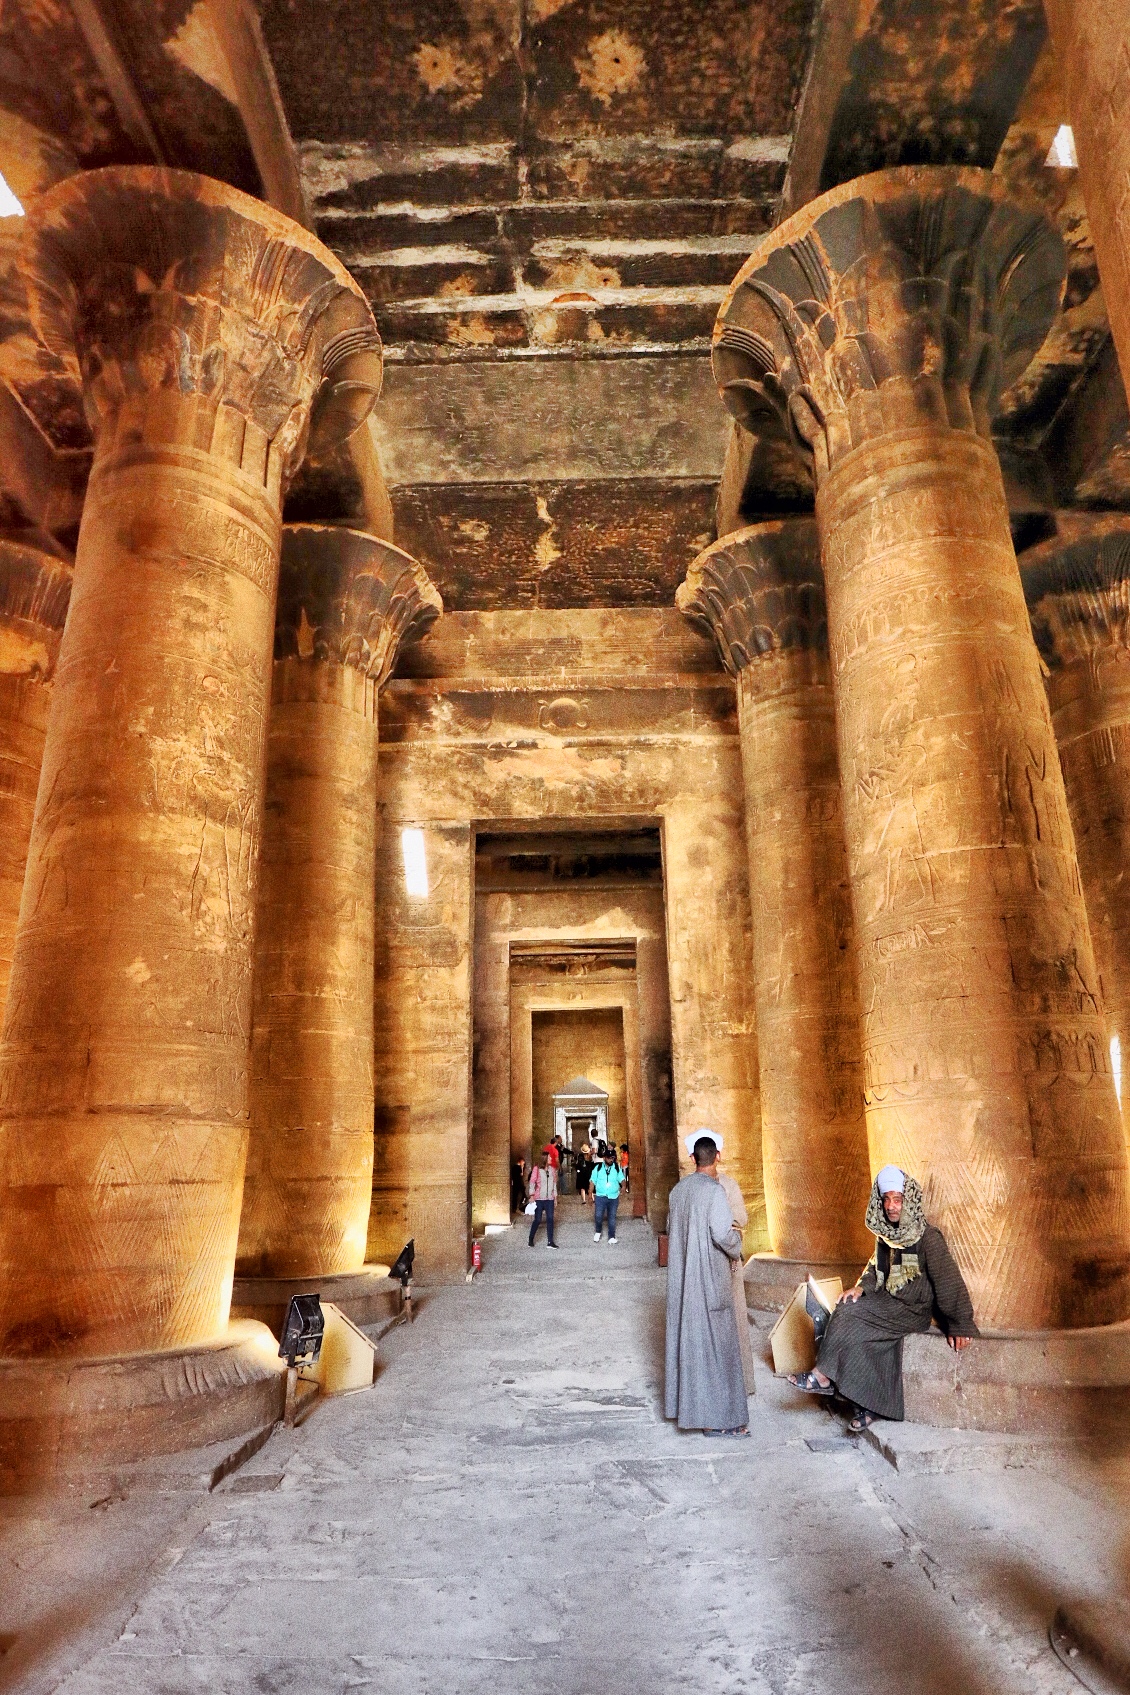 Cool shade at the Temple of Horus, god of safety and protection